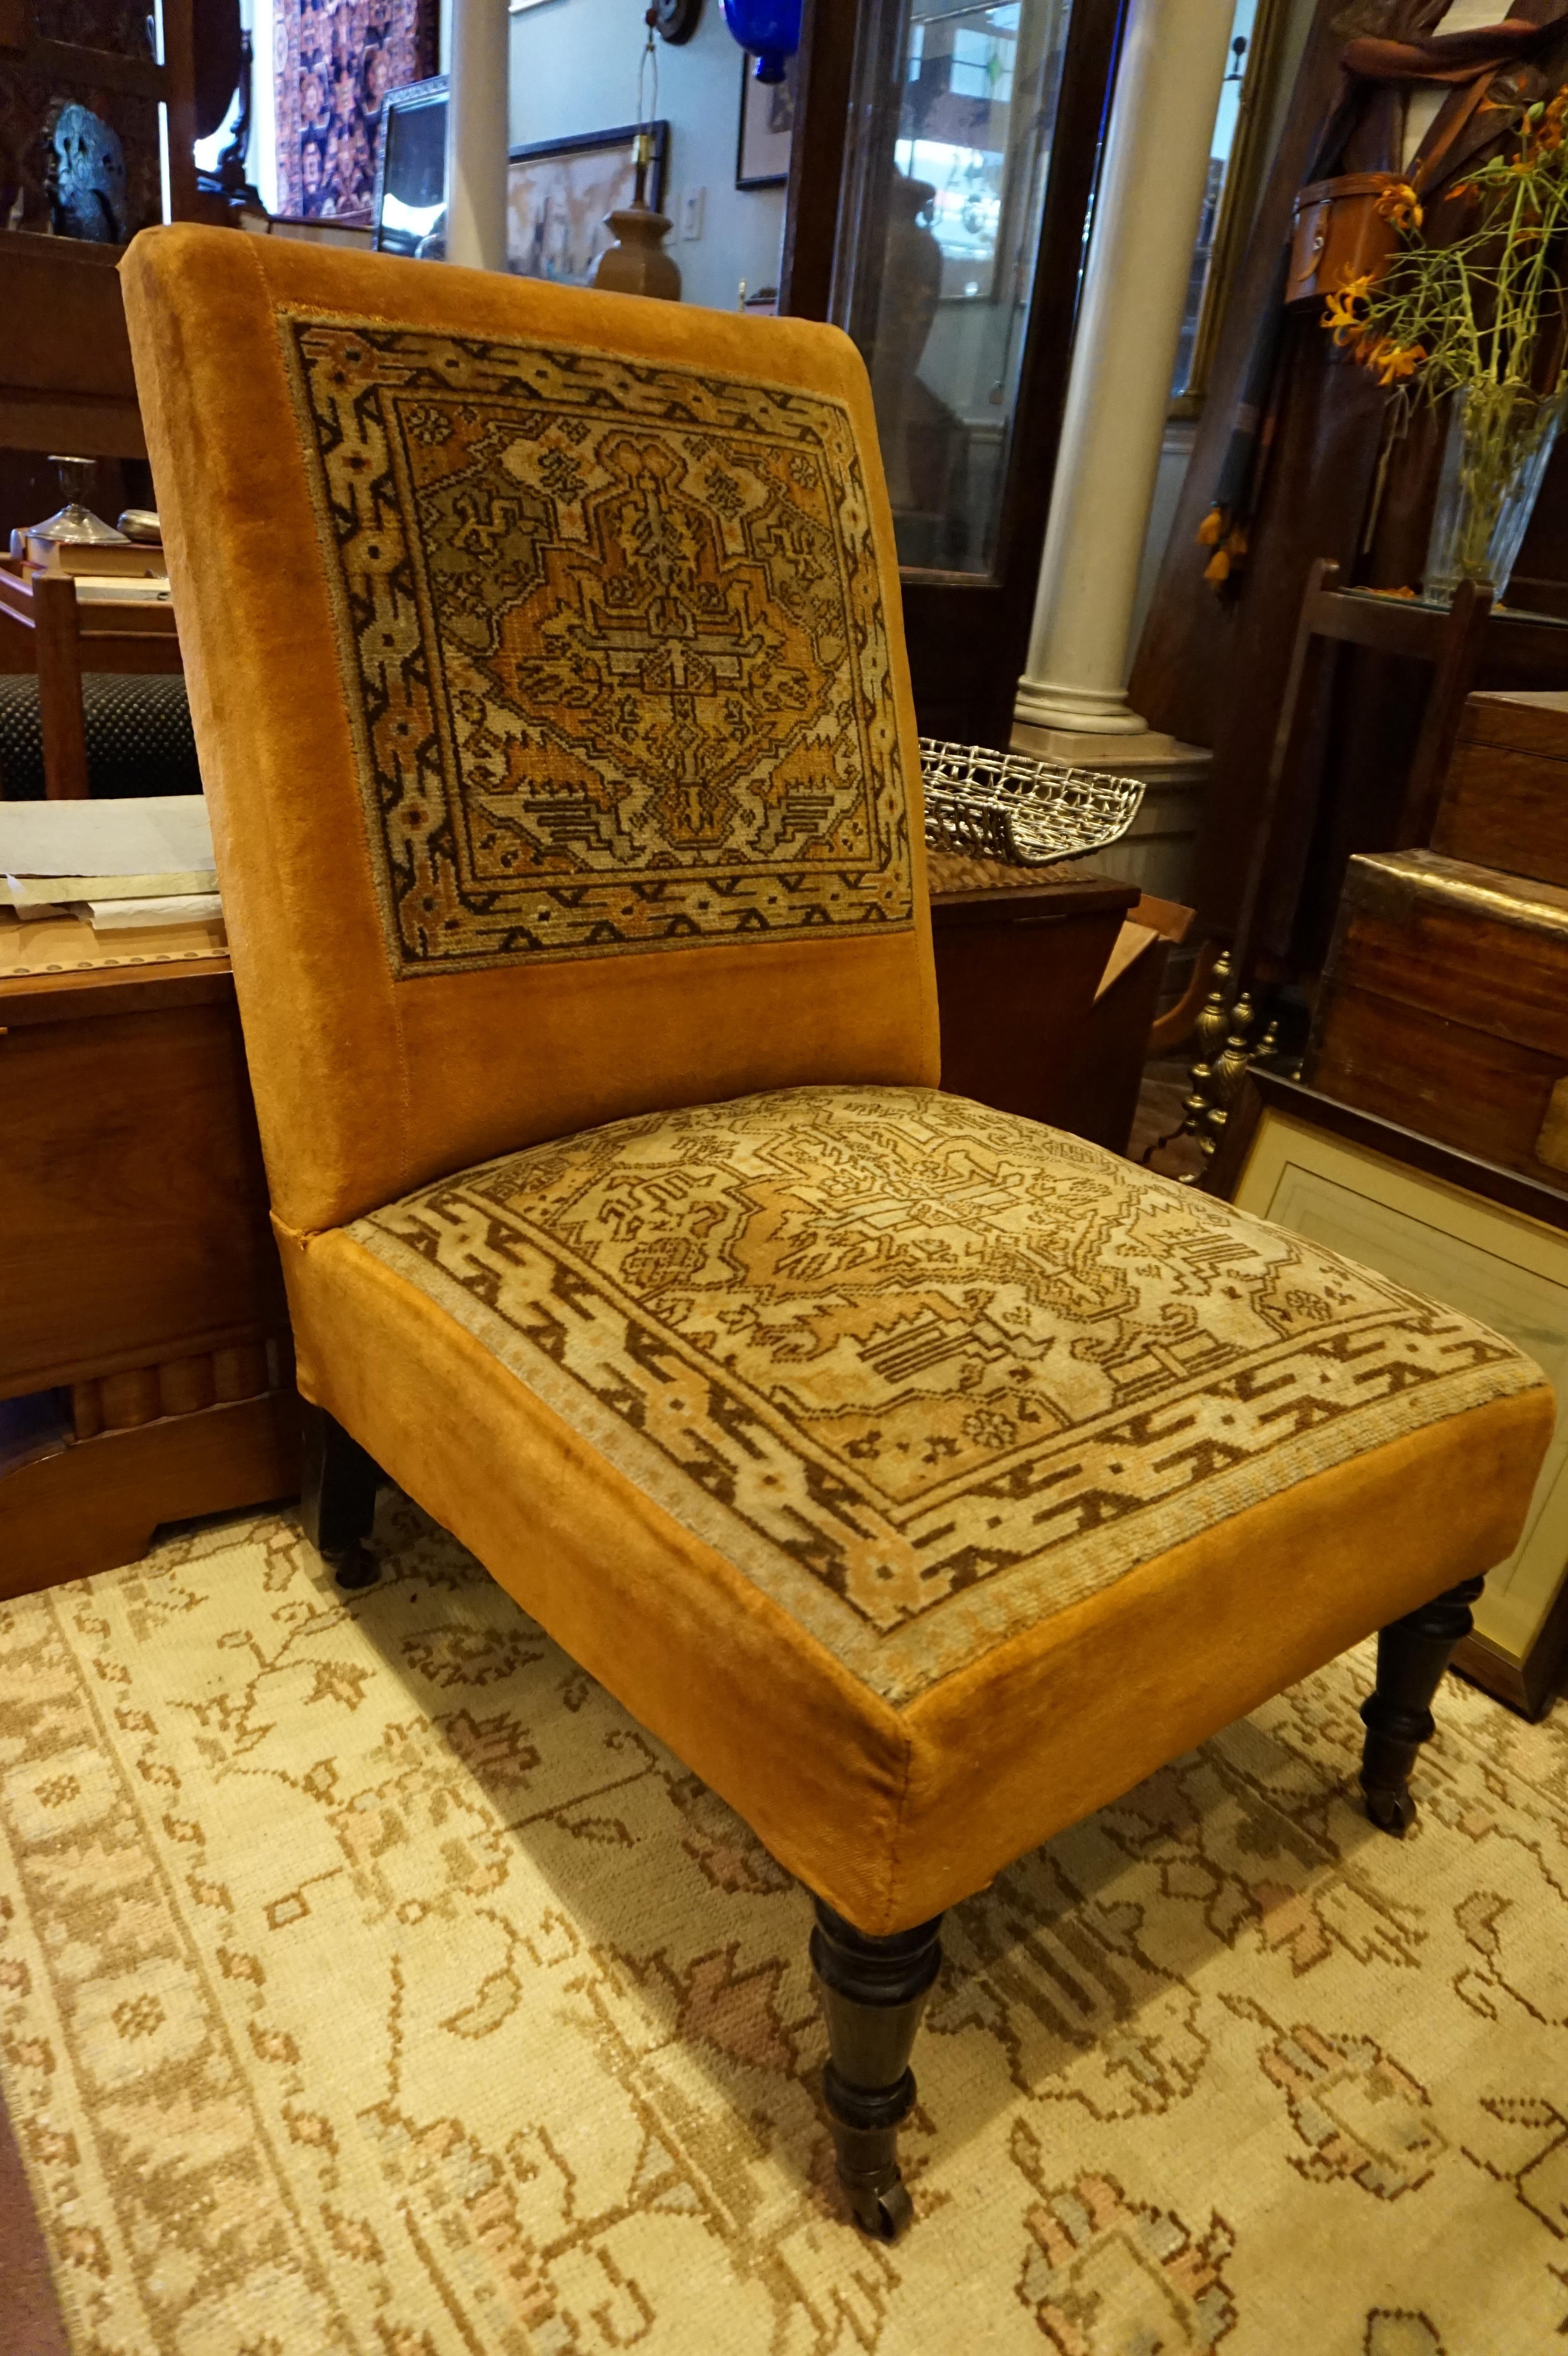 Antique low chair with hand knotted tribal carpet upholstery in saffron hues, circa 1890. Original horsehair stuffing which is still comfortable. On casters. Ideal fire side or slipper chair with originality, warmth and character.

      